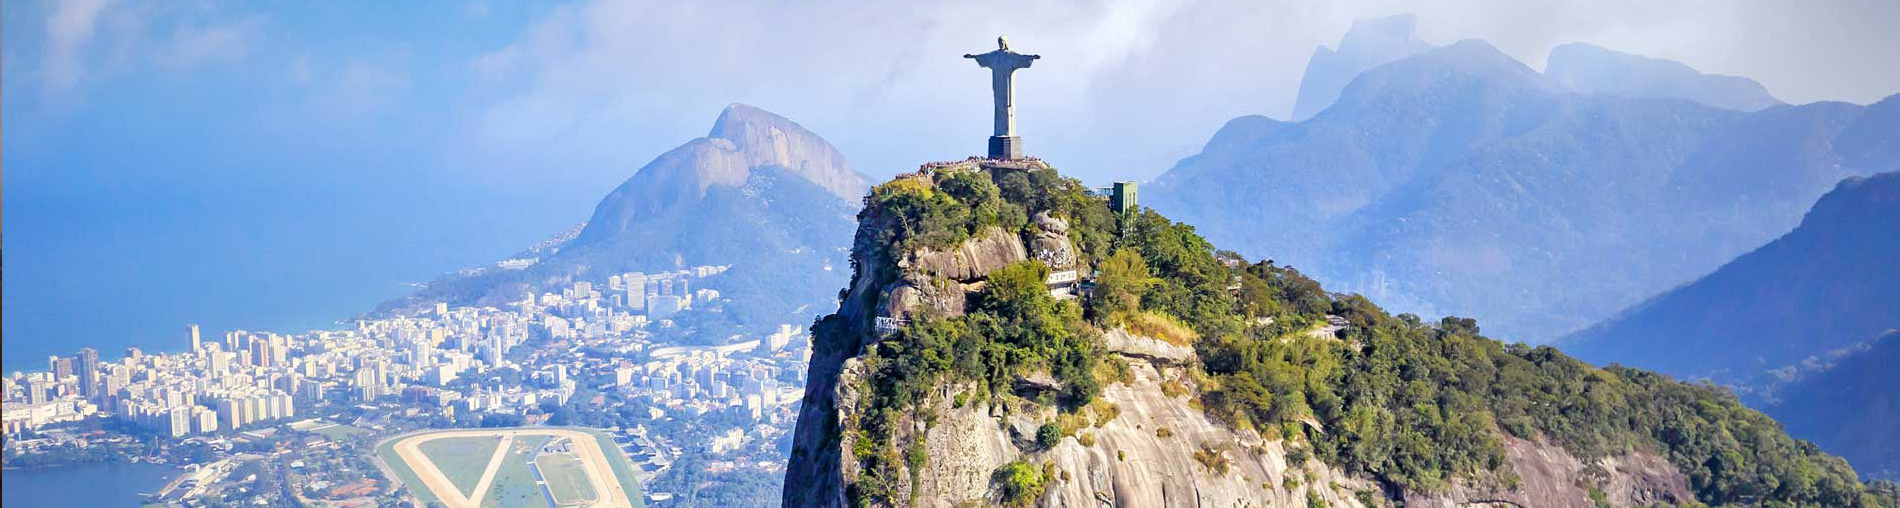 Most Popular Brazil Tour Packages